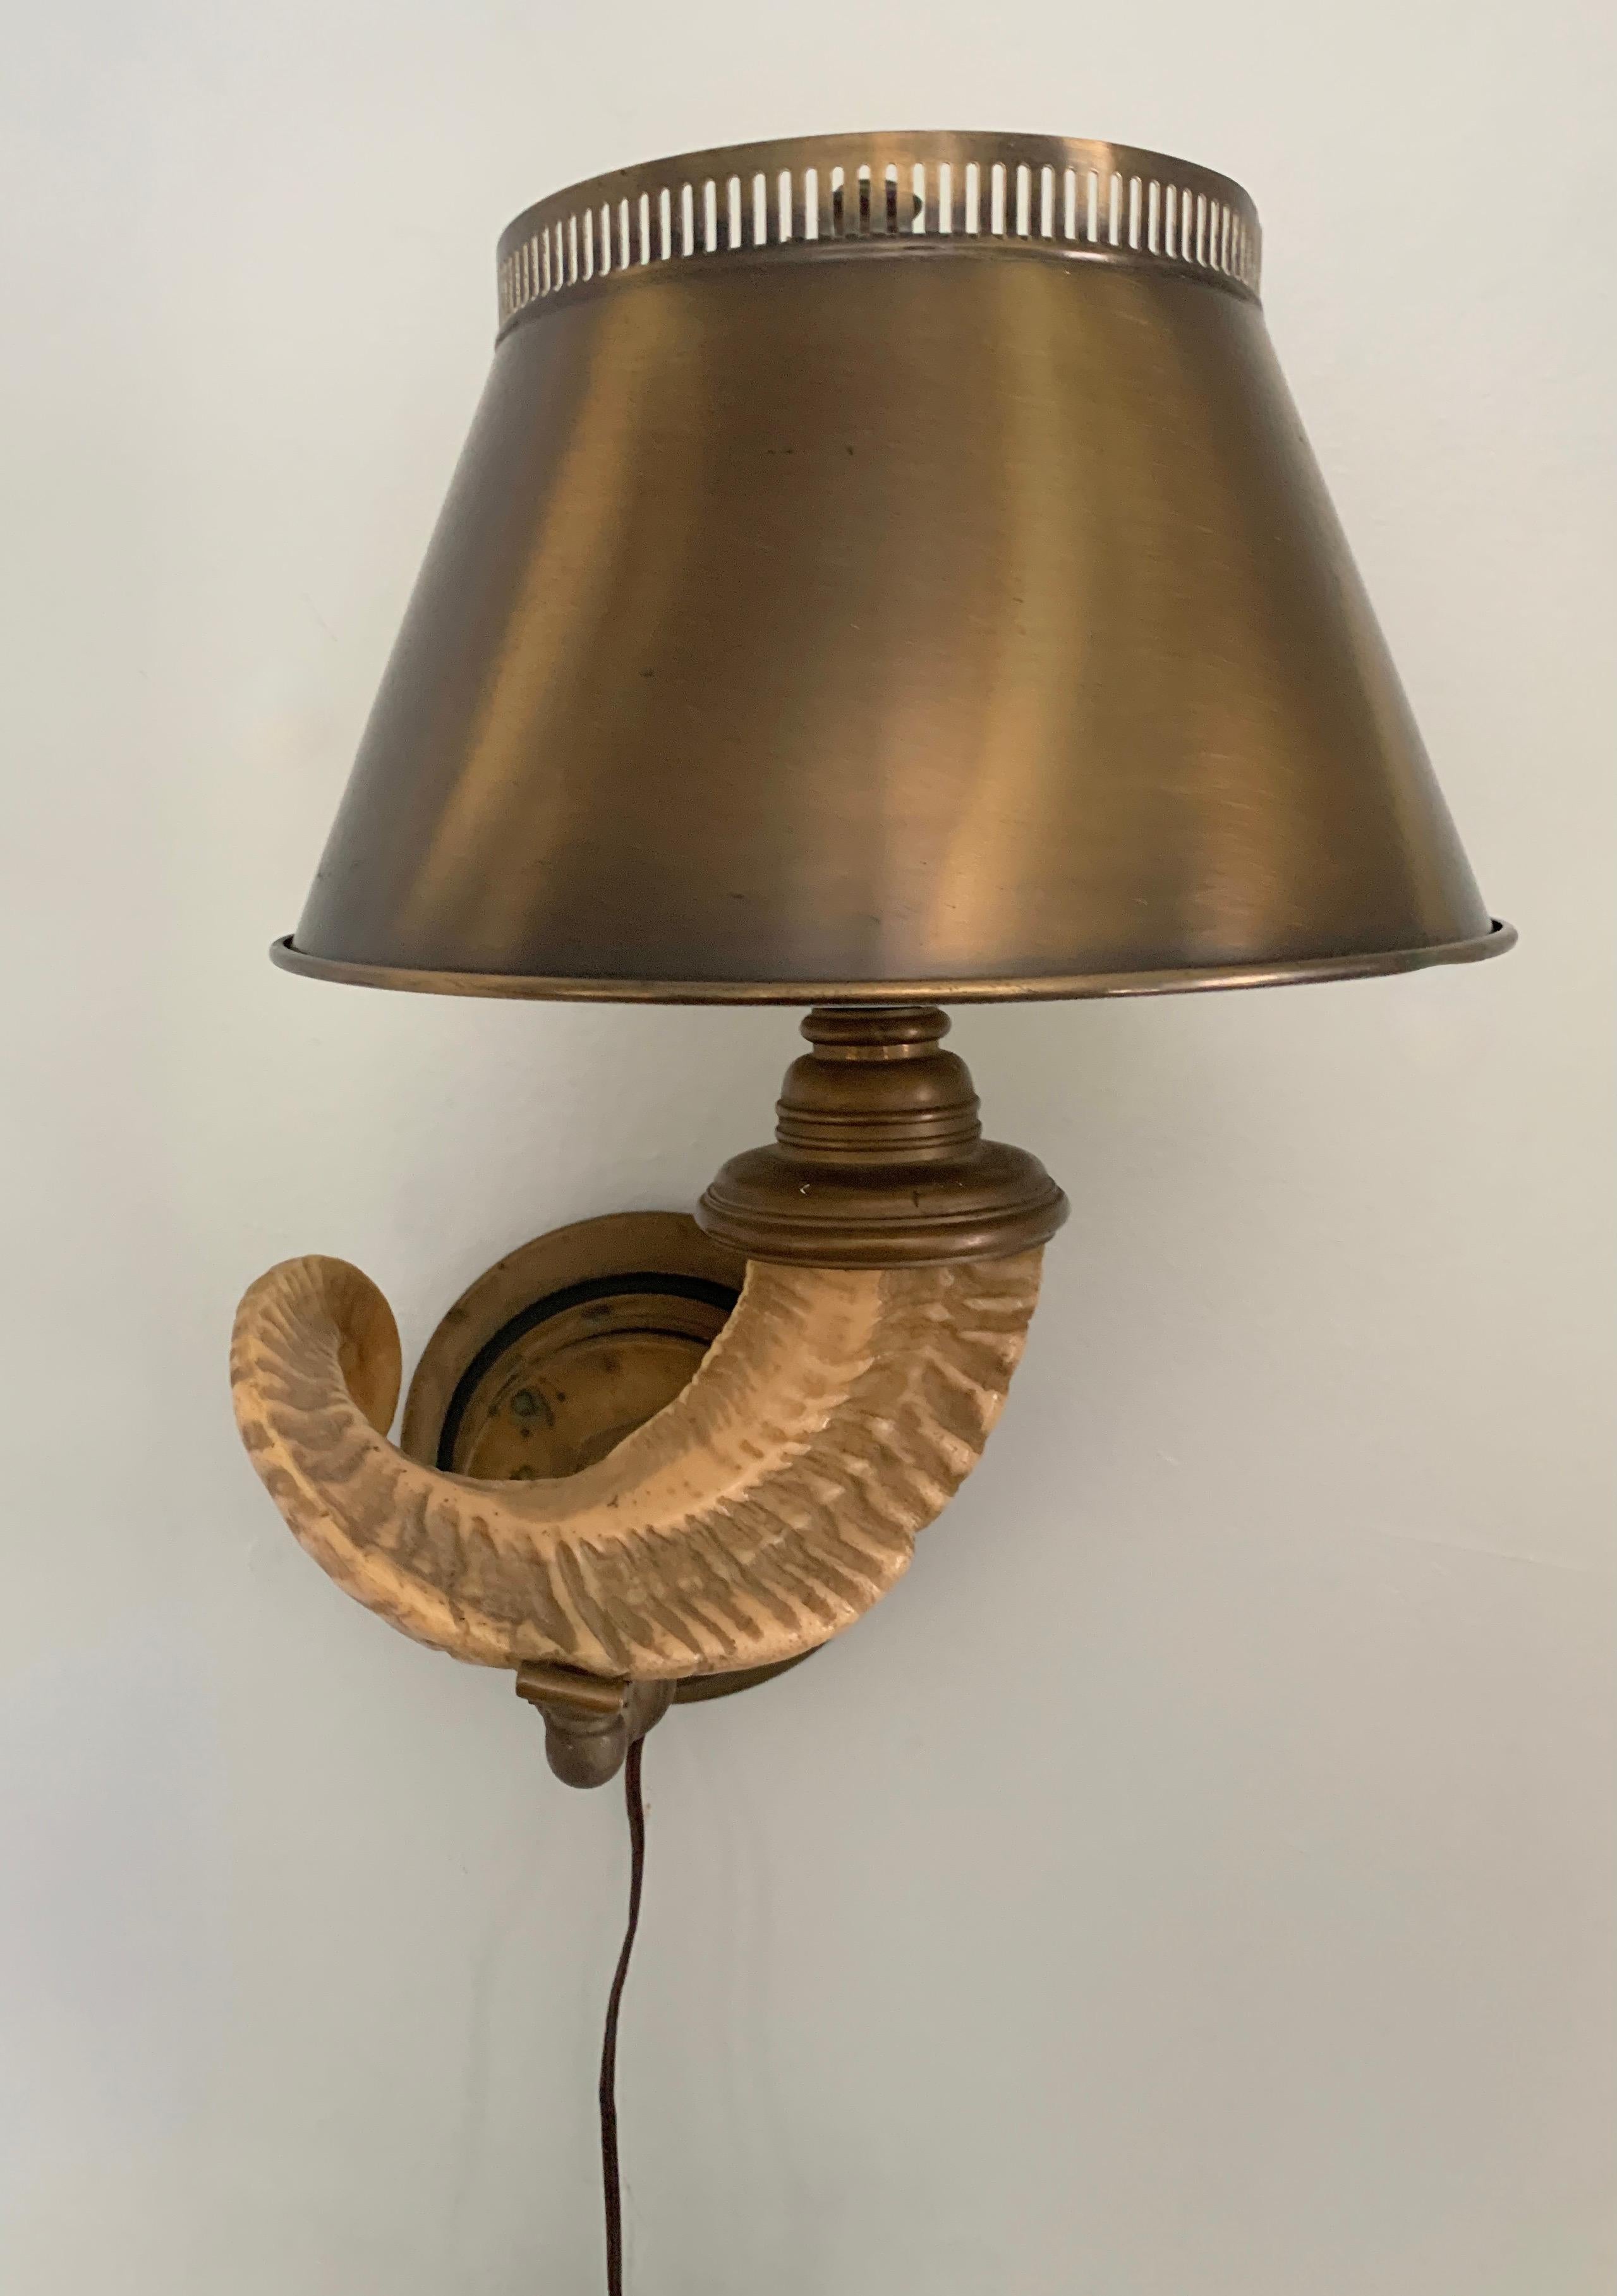 Rustic Chapman Wall Sconce with Ram Horn Detail and Metal Shade